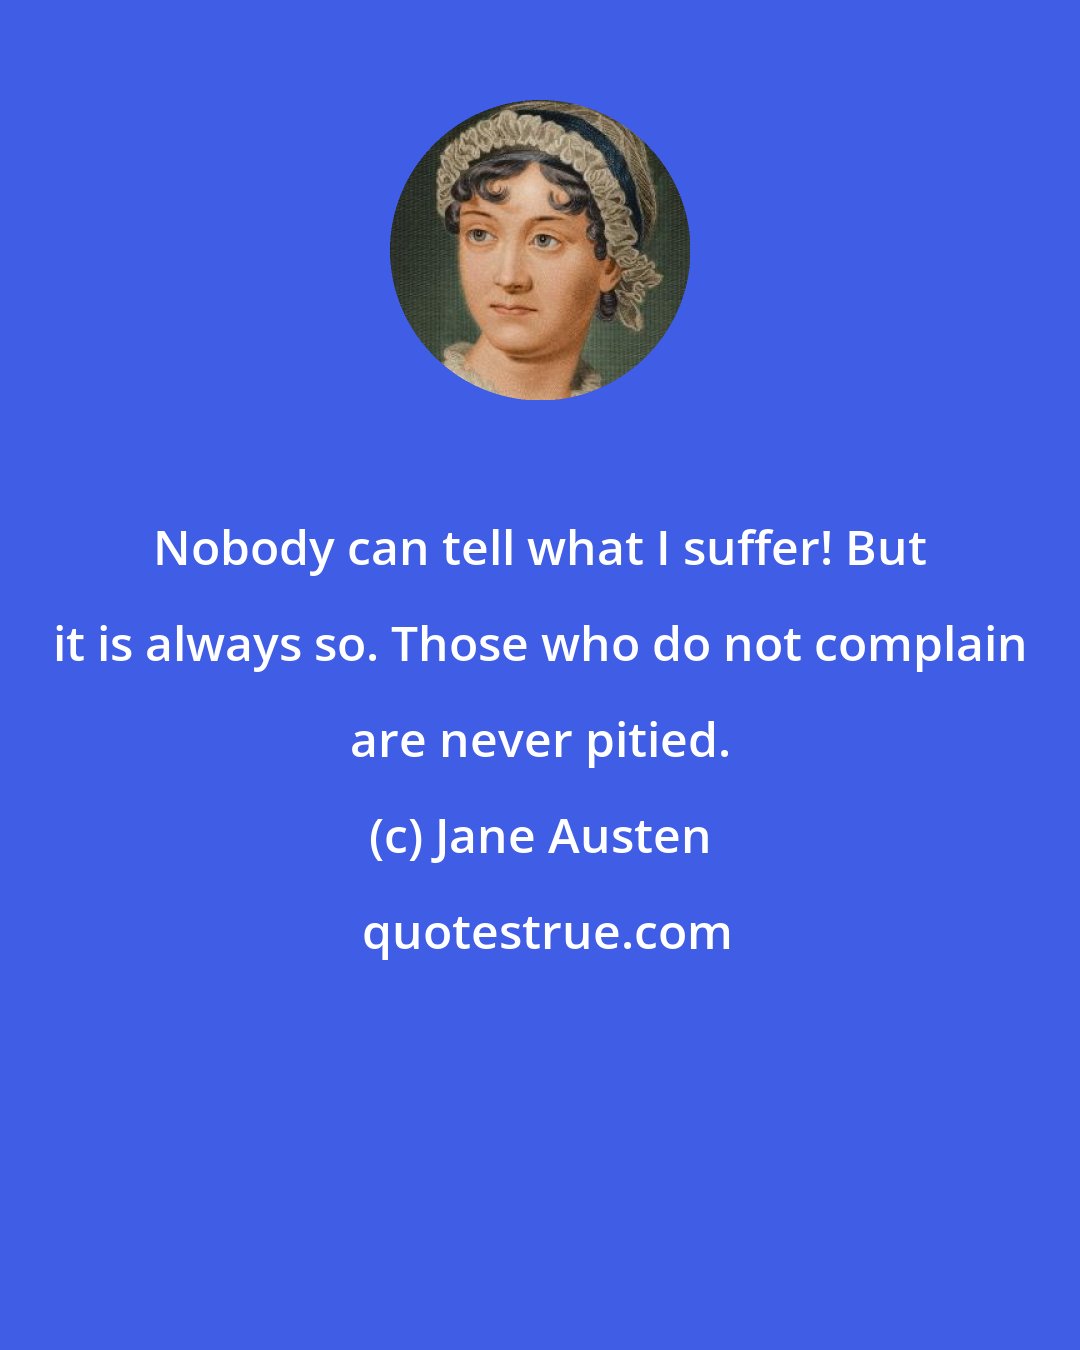 Jane Austen: Nobody can tell what I suffer! But it is always so. Those who do not complain are never pitied.